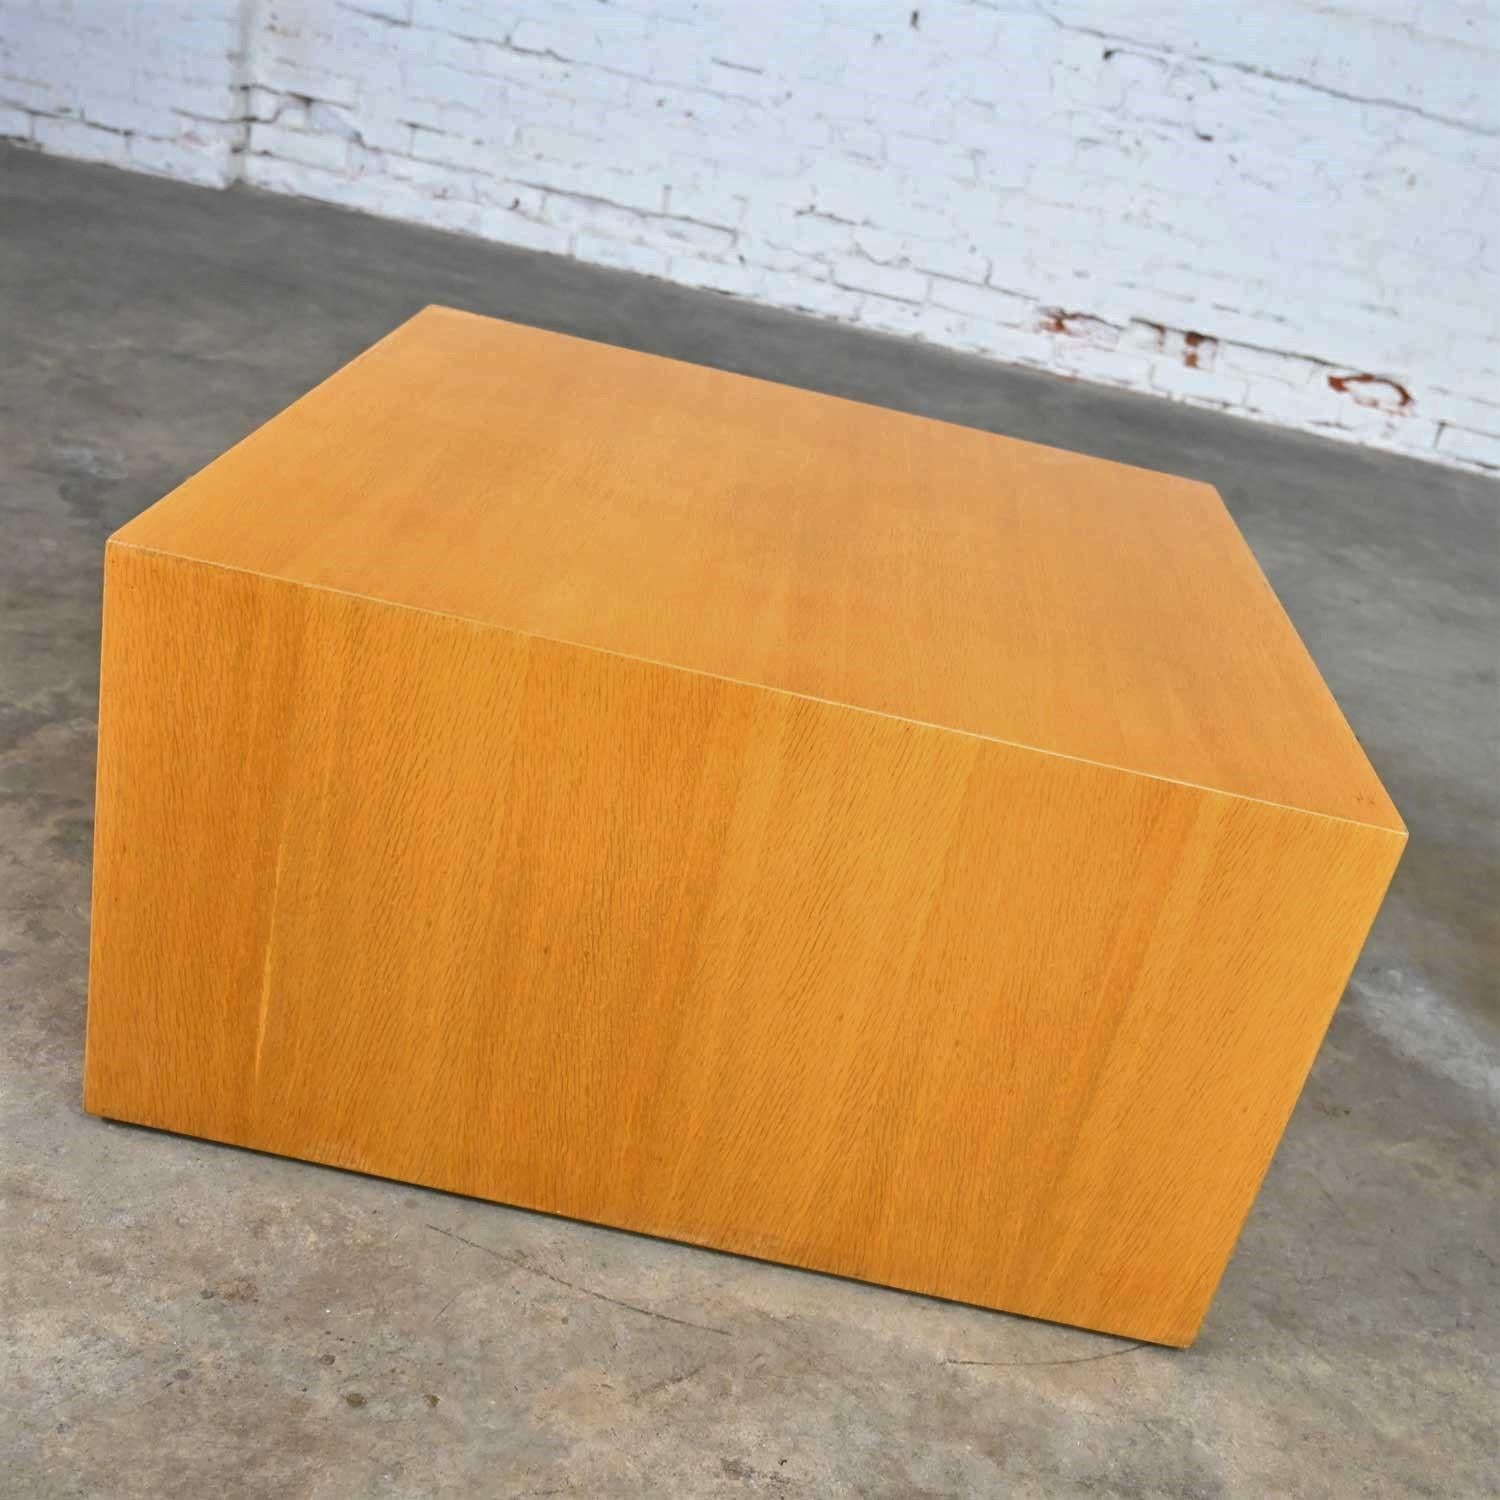 Outstanding Intrex Furniture wood veneer cube side table, end table, or pedestal attributed to Paul Mayen. Beautiful condition, keeping in mind that this is vintage and not new so will have signs of use and wear. This piece has had some veneer spots